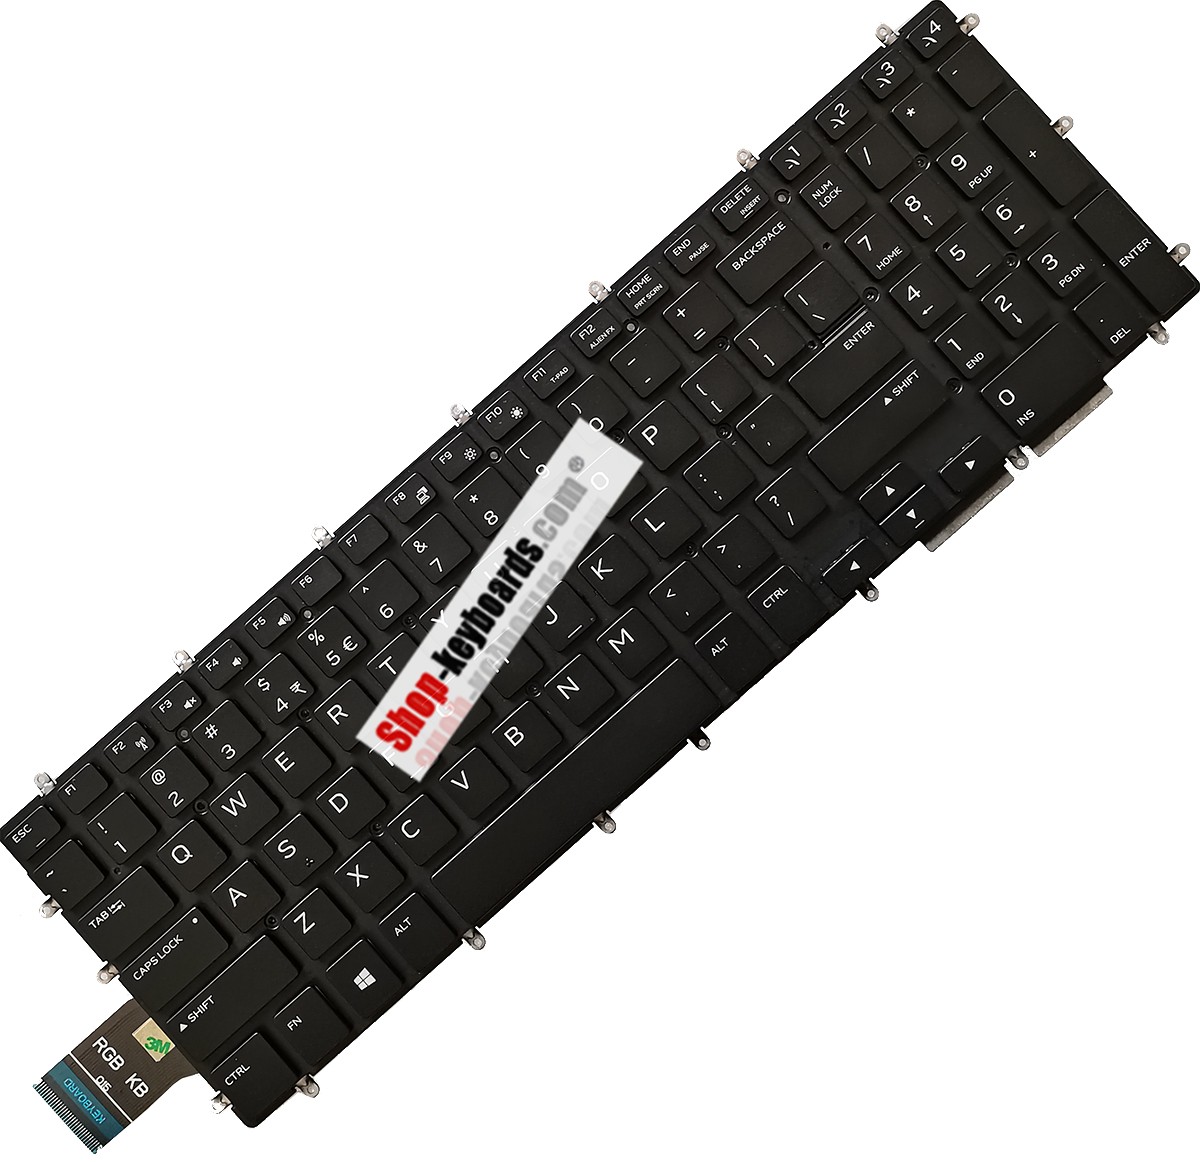 Dell AW15-6627AW18-3941 Keyboard replacement